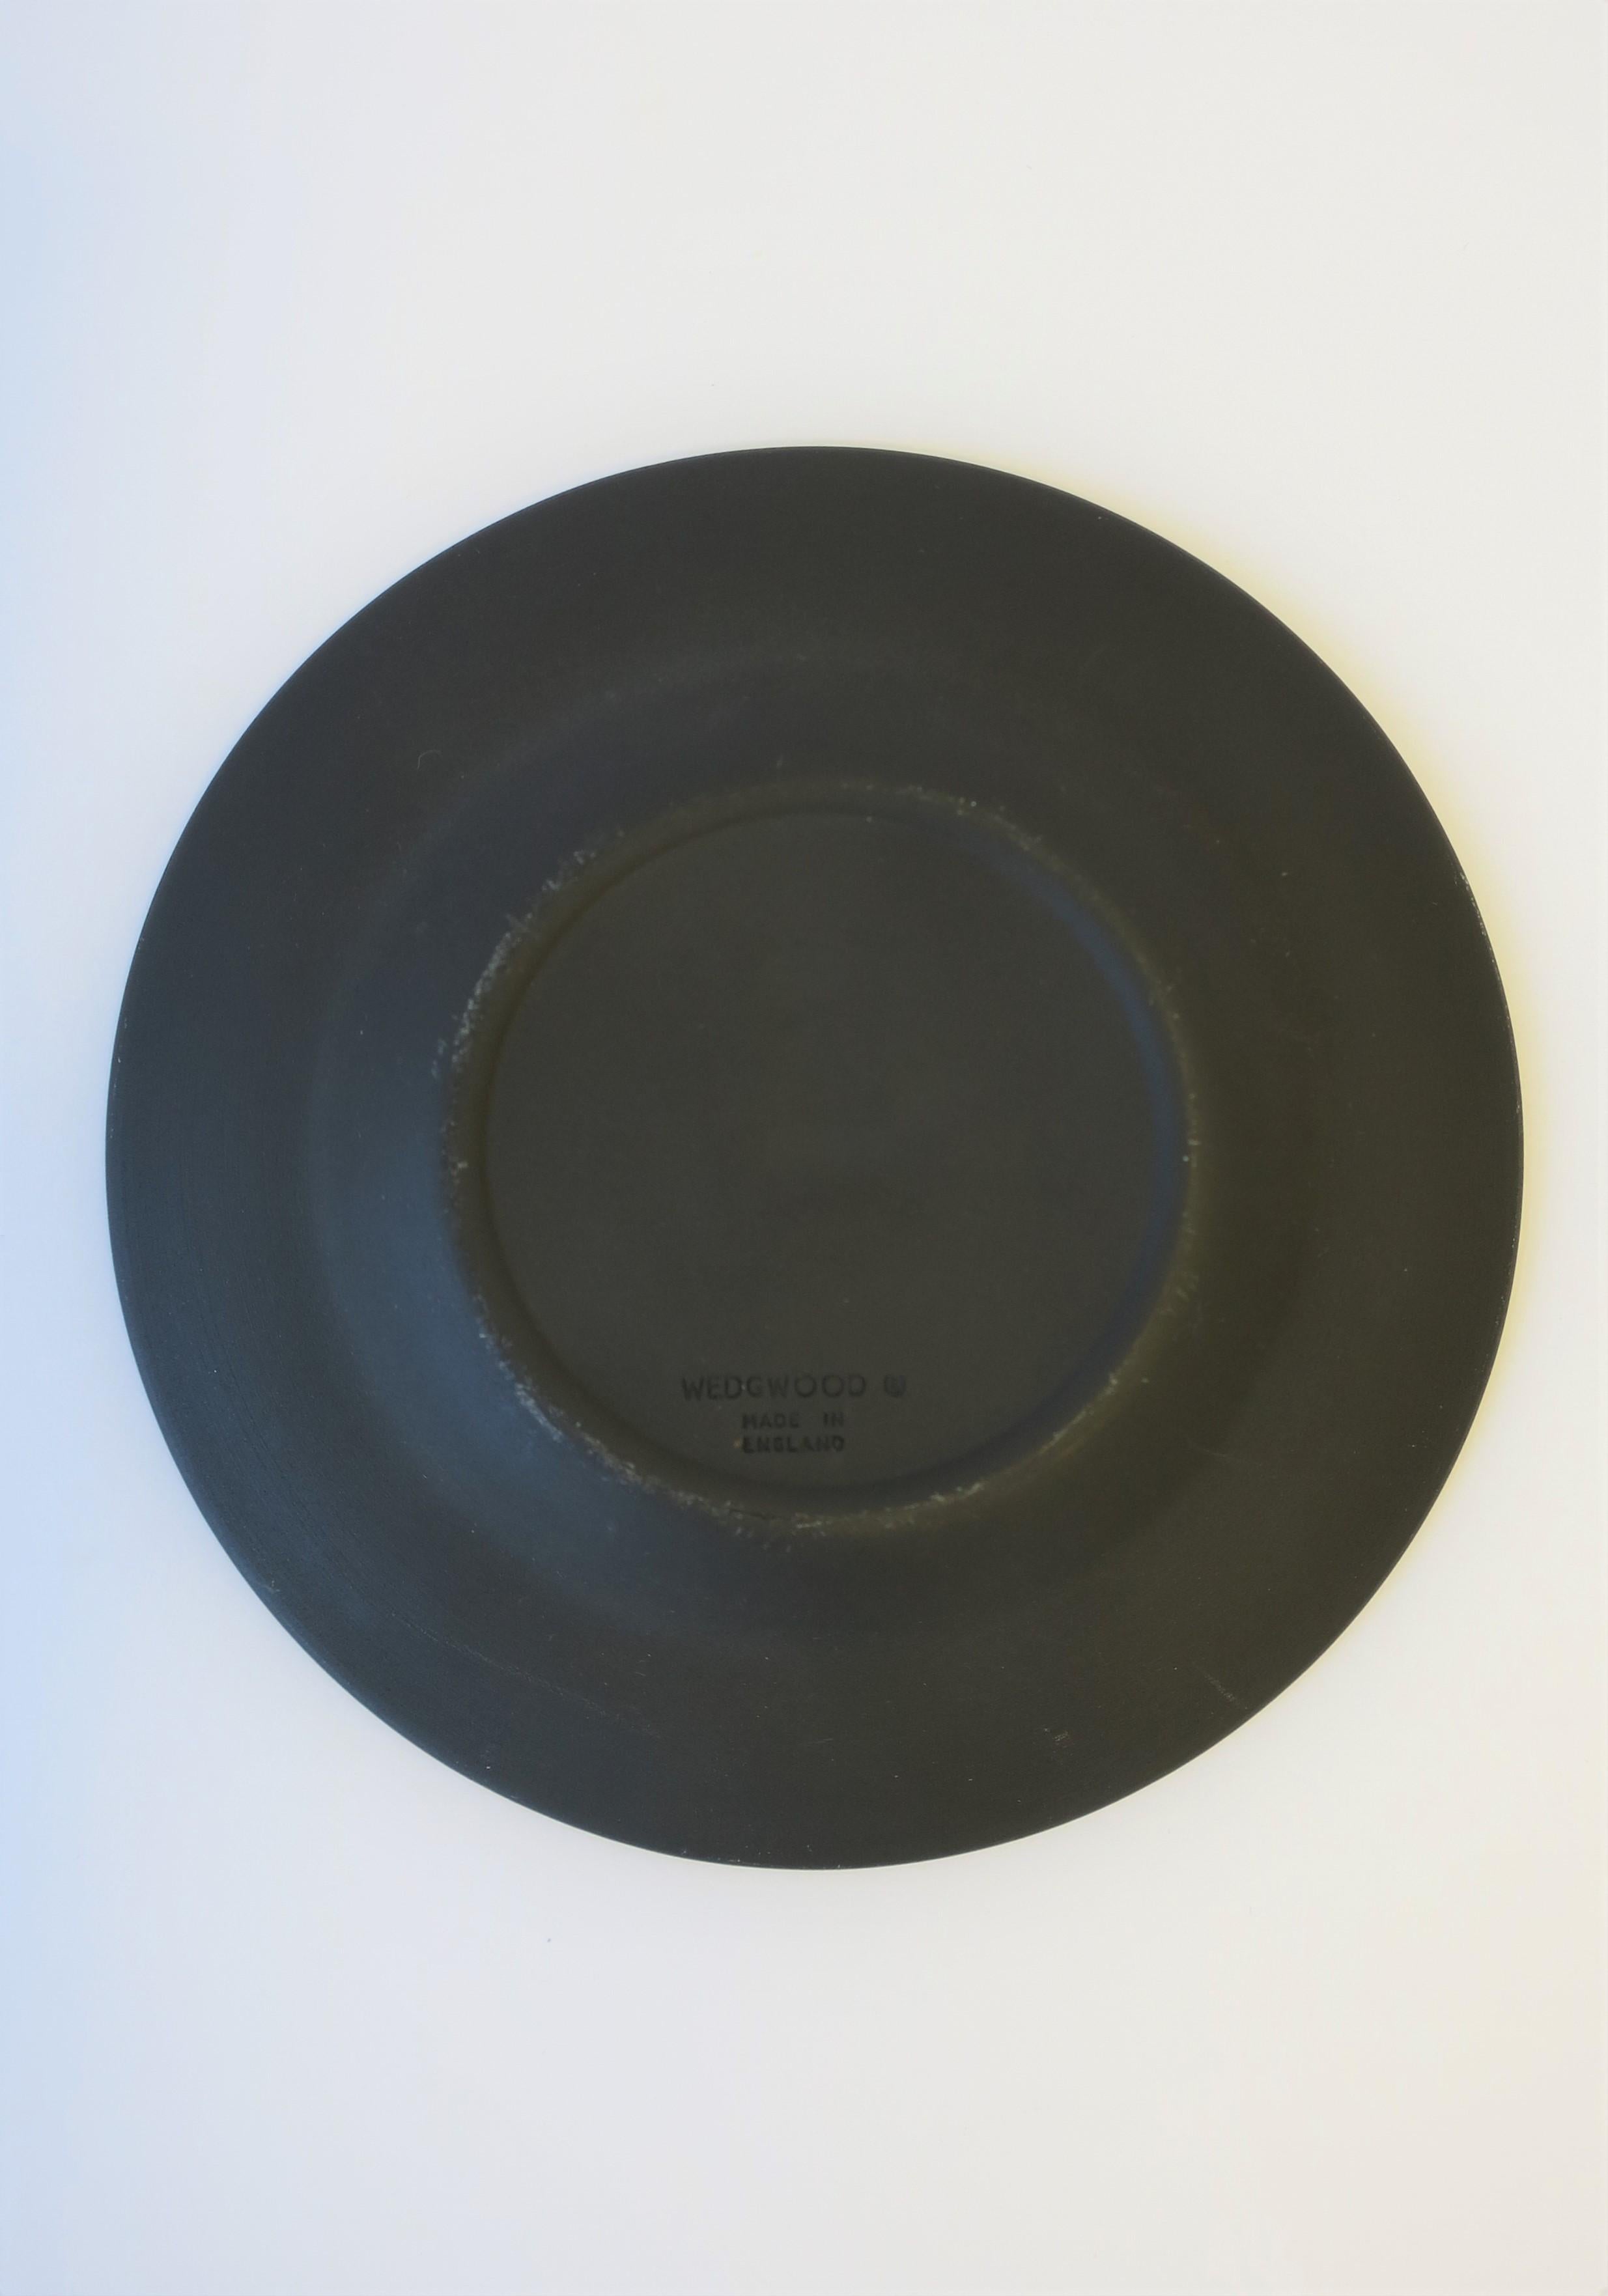 Neoclassical Revival English Matte Black Basalt and Gold Raised Relief Wedgwood Dish 